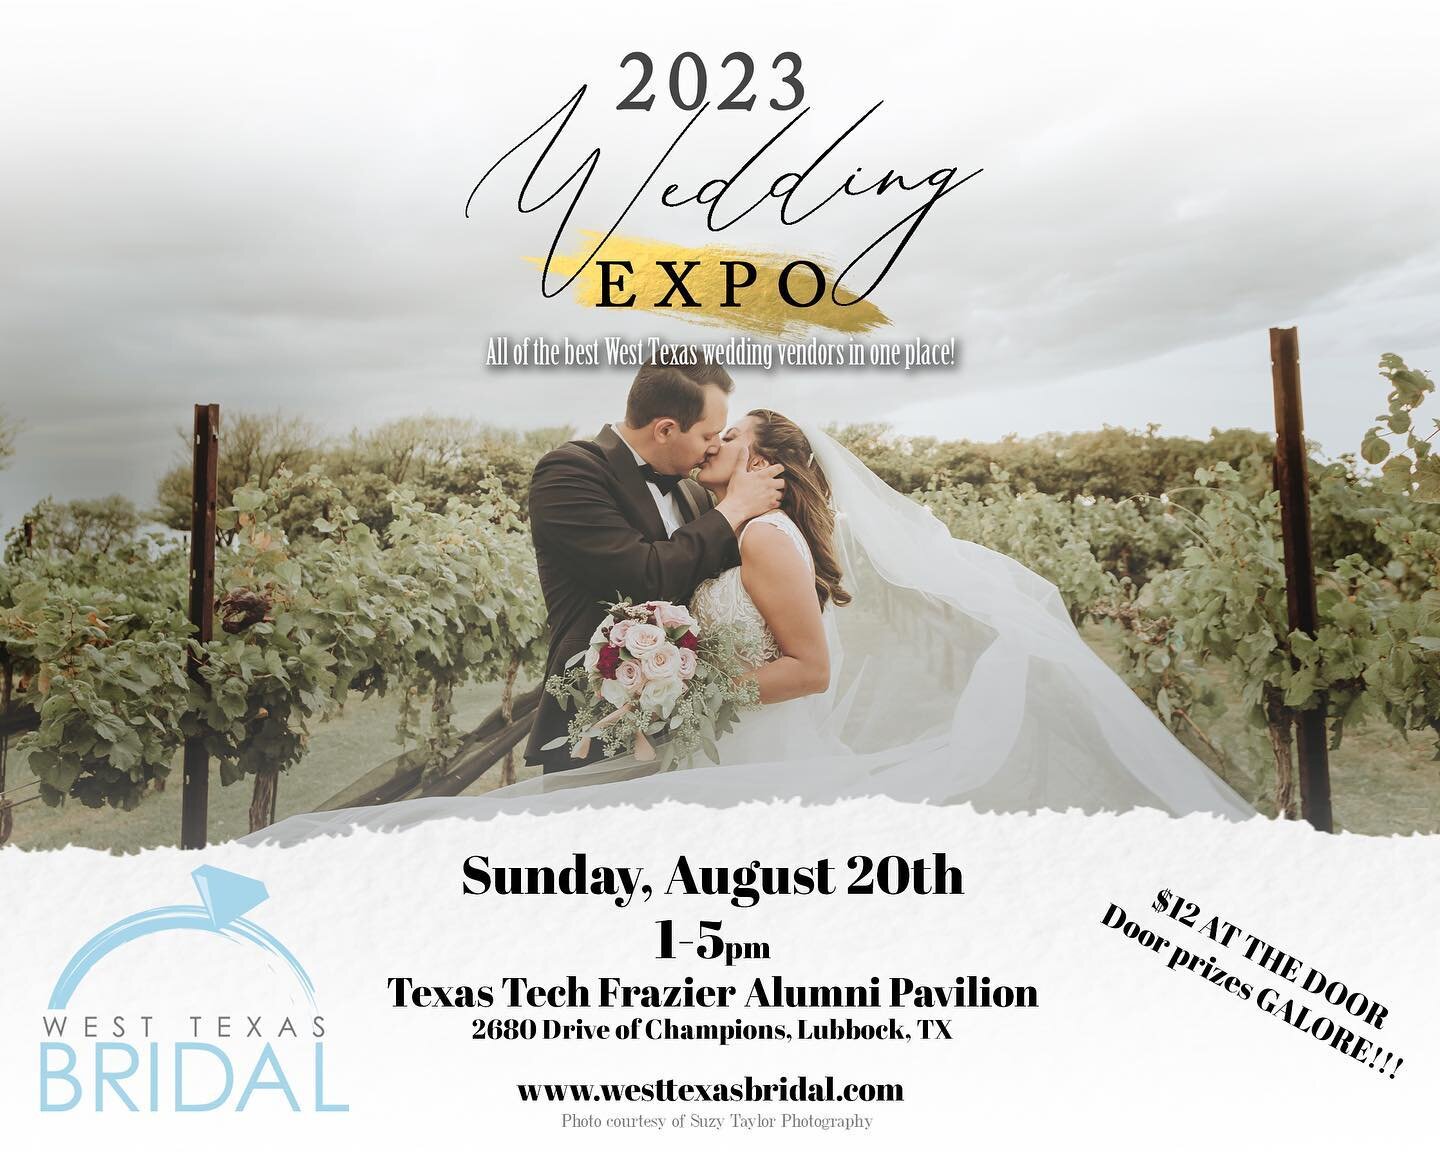 We are so excited to be a part of @westtexasbridal and their annual Bridal Expo this Sunday.
Come along, meet all the amazing vendors and check out what we have to offer.

PS: You can totally play on the arcades too!